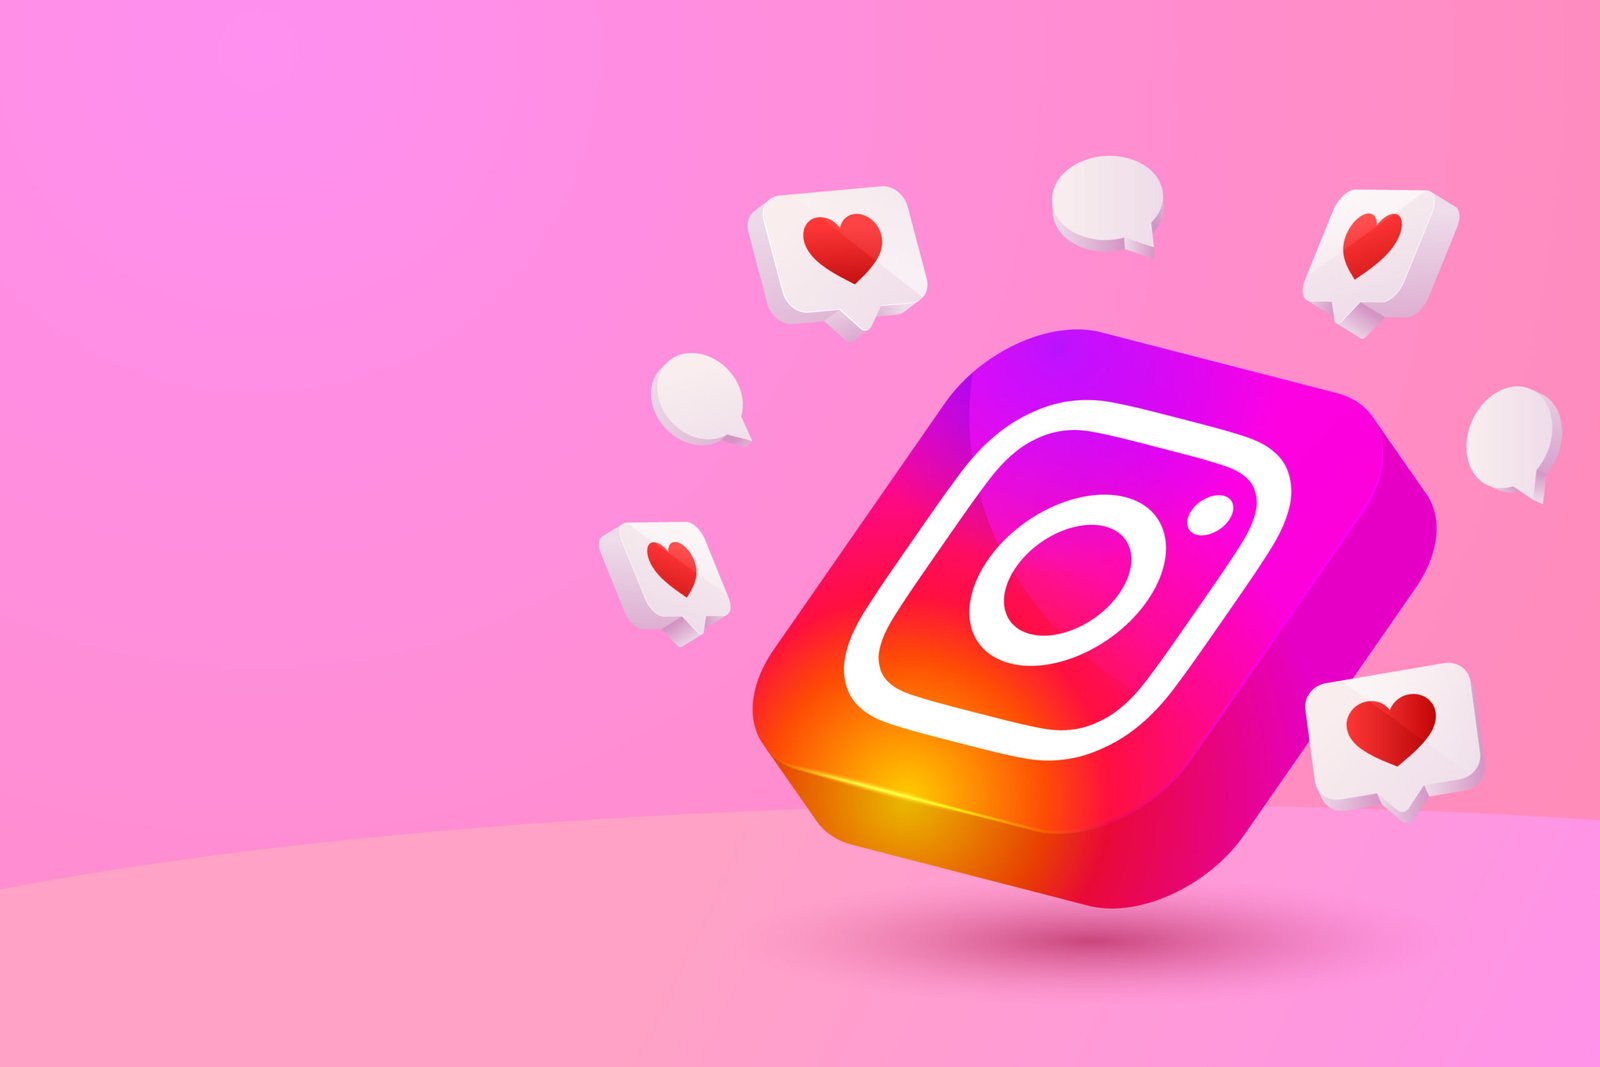 20 Expert Tips to Get More Followers on Instagram